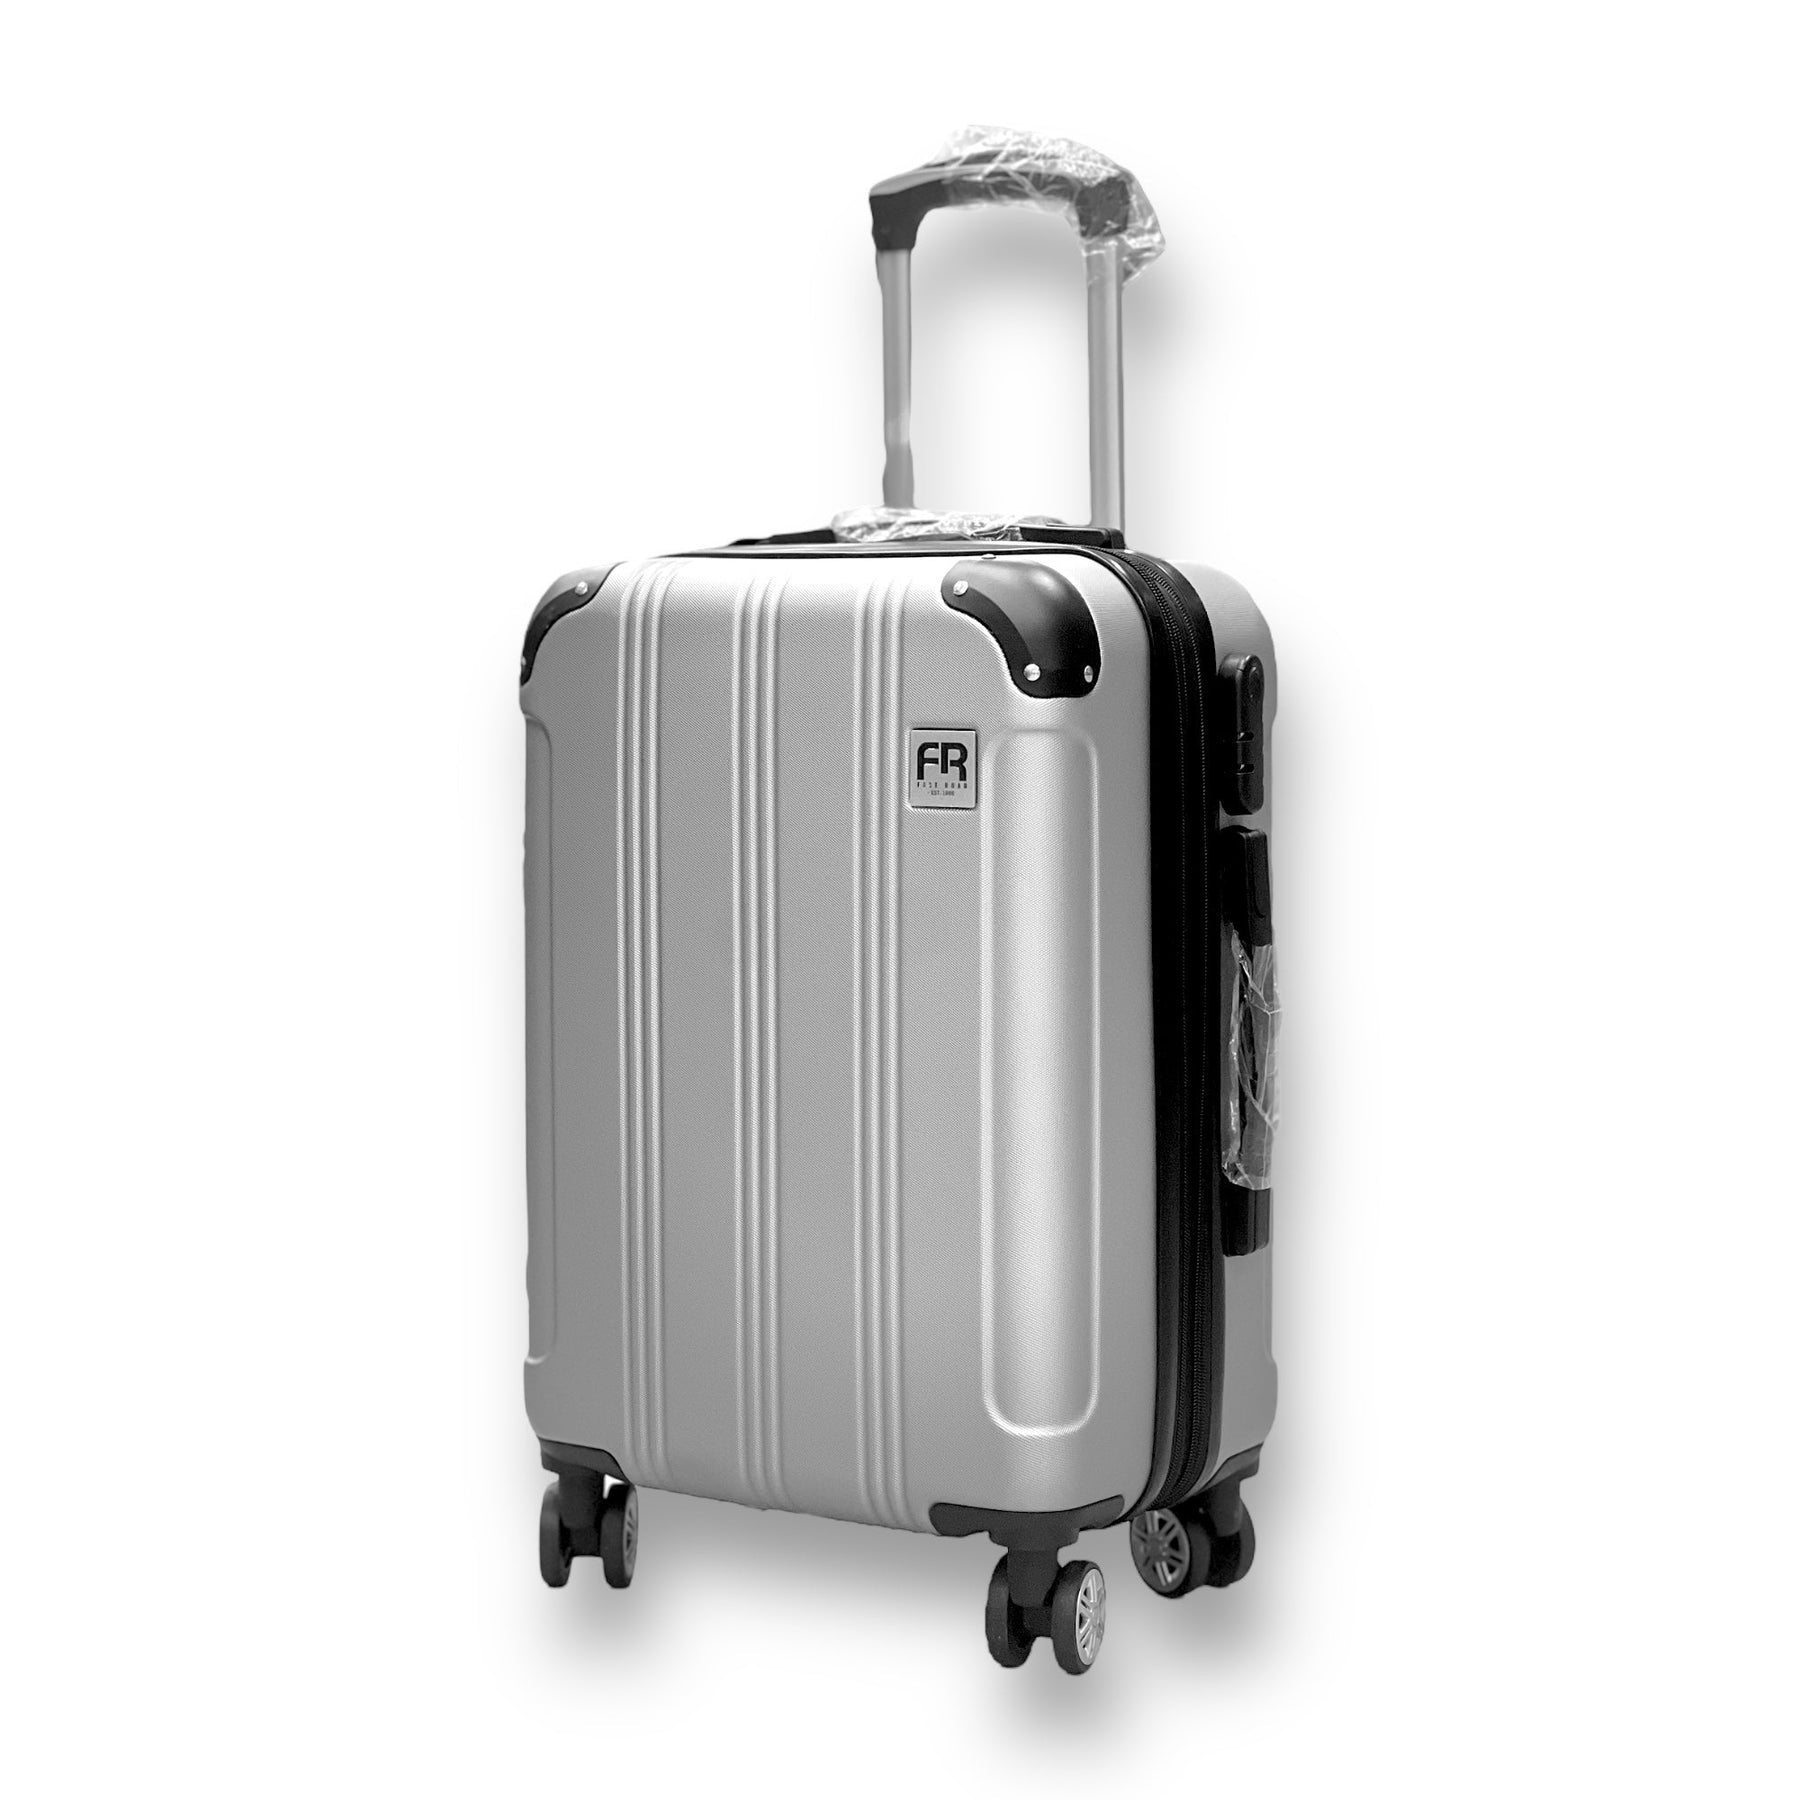 Fast Road Hardside Expandable Roller Luggage Silver, Carry-on 20 inch